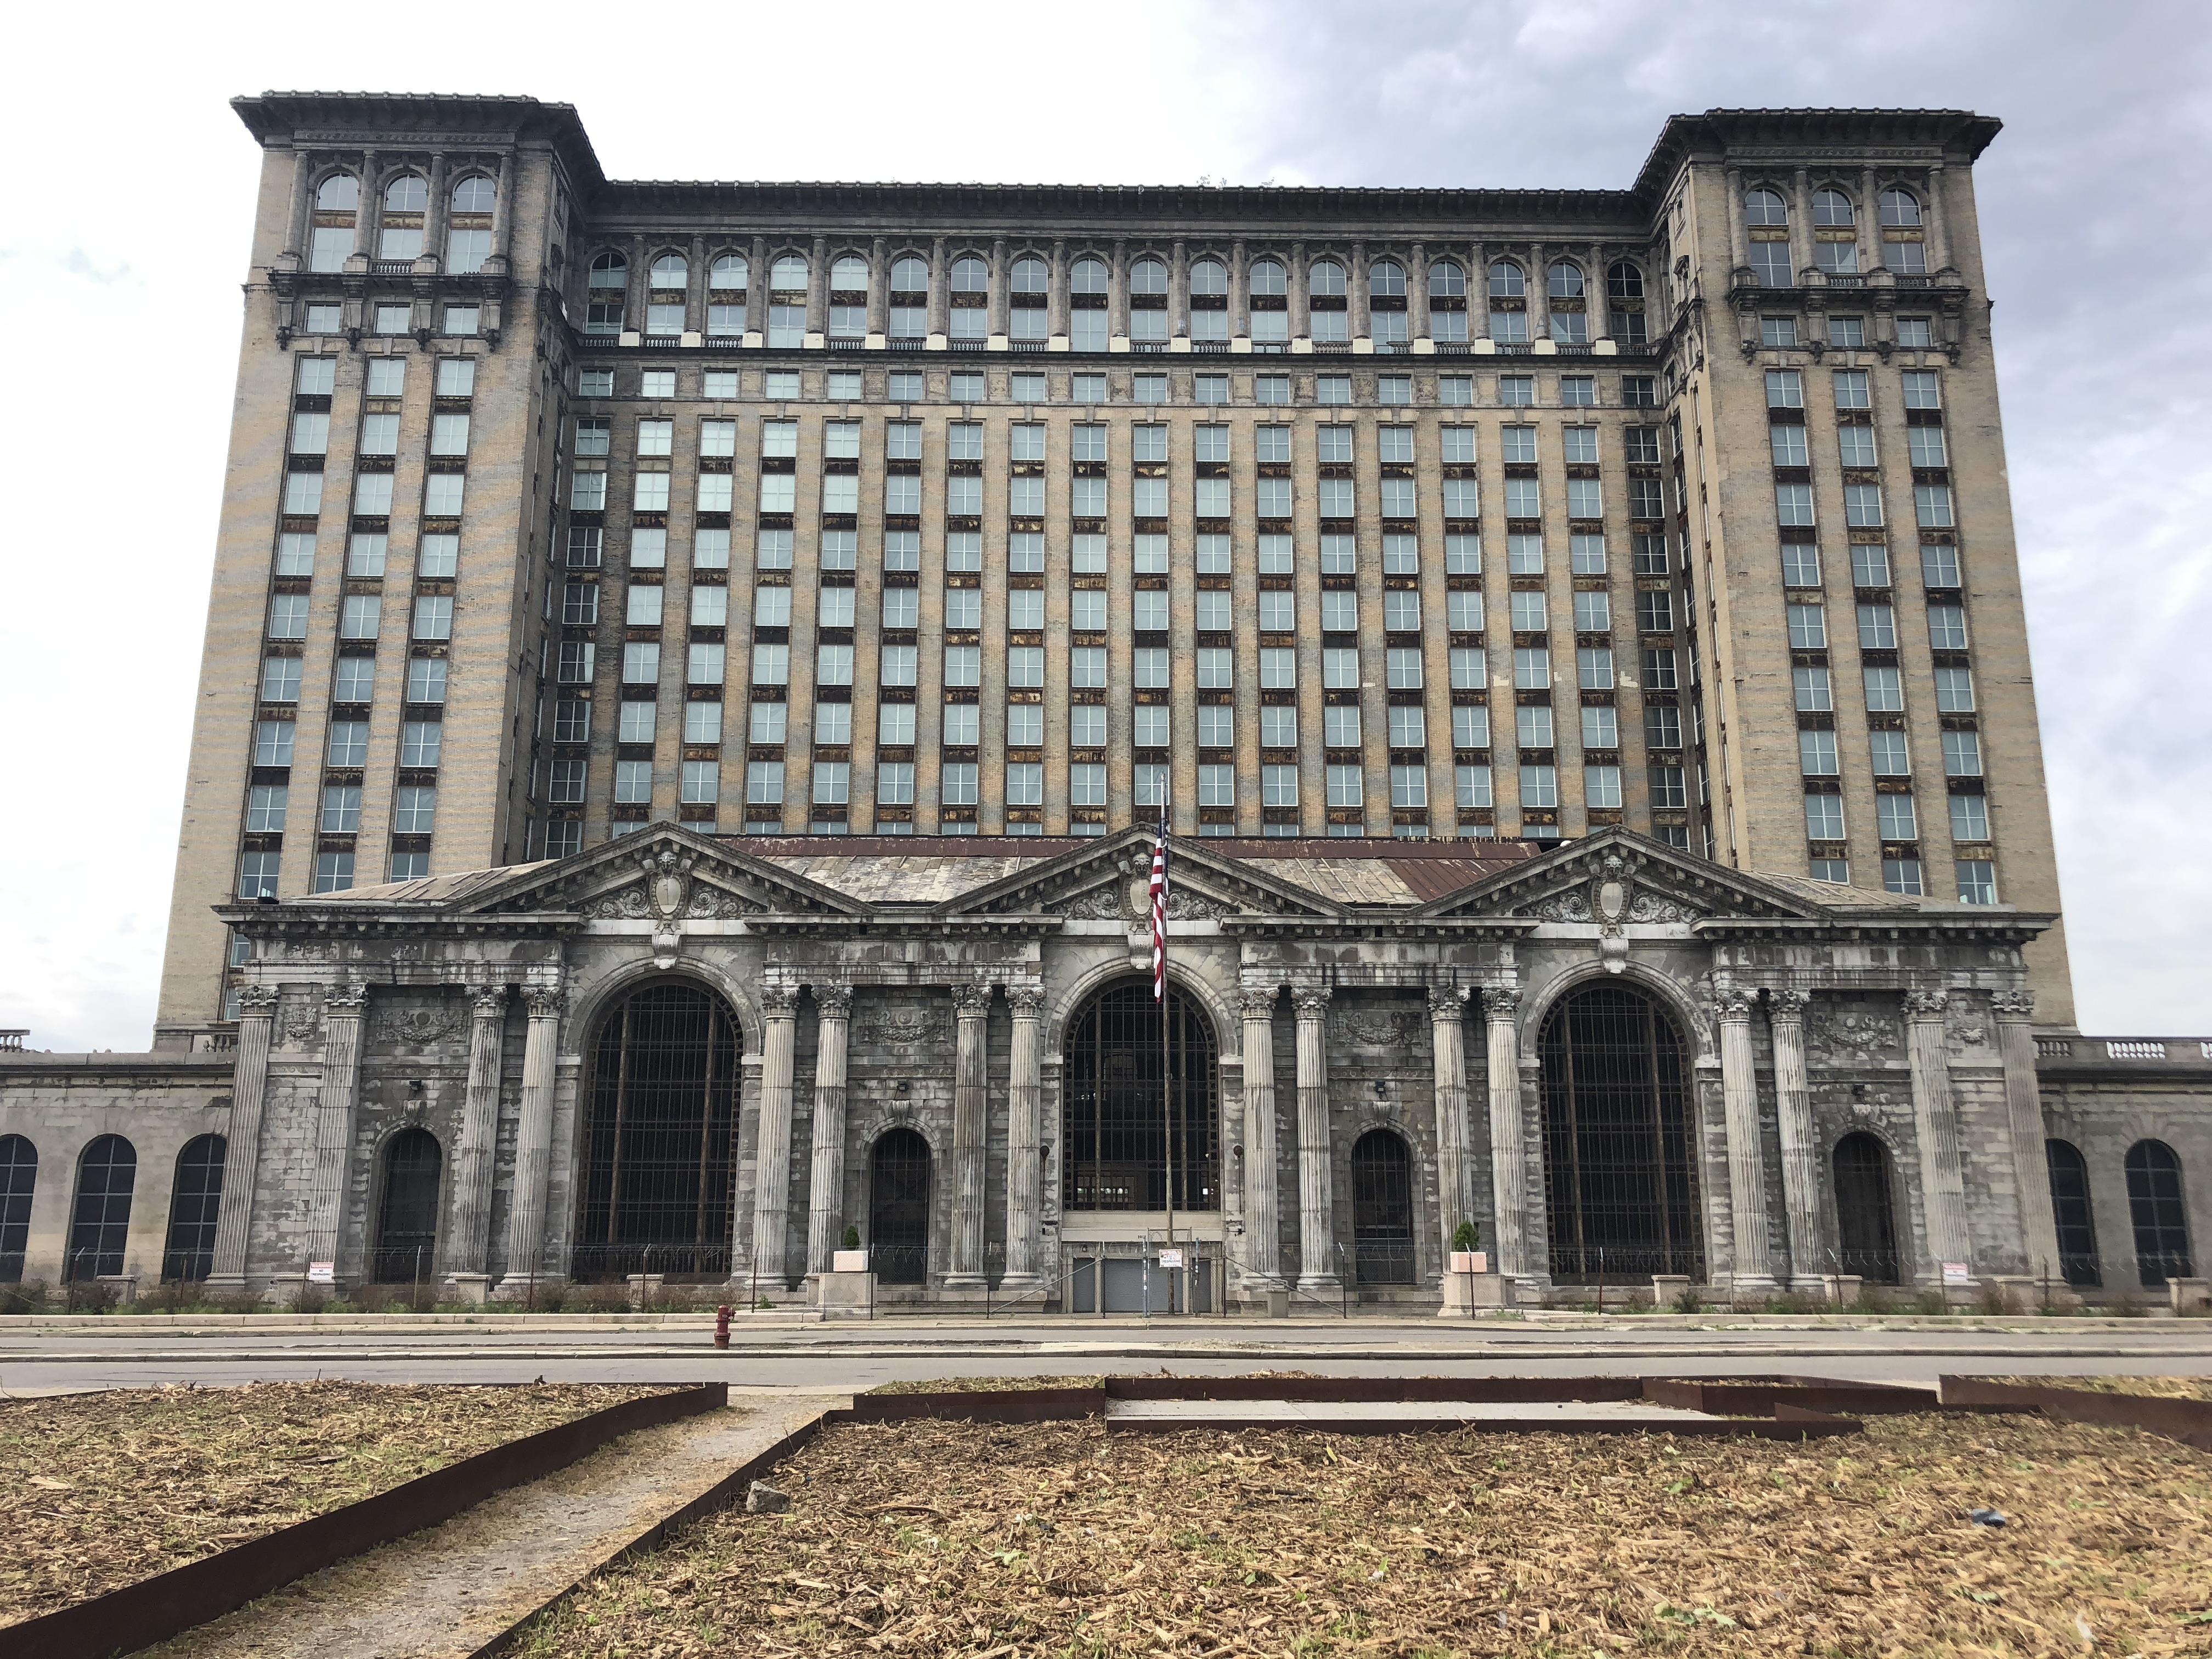 Ground-level picture of Michigan Central Train Station